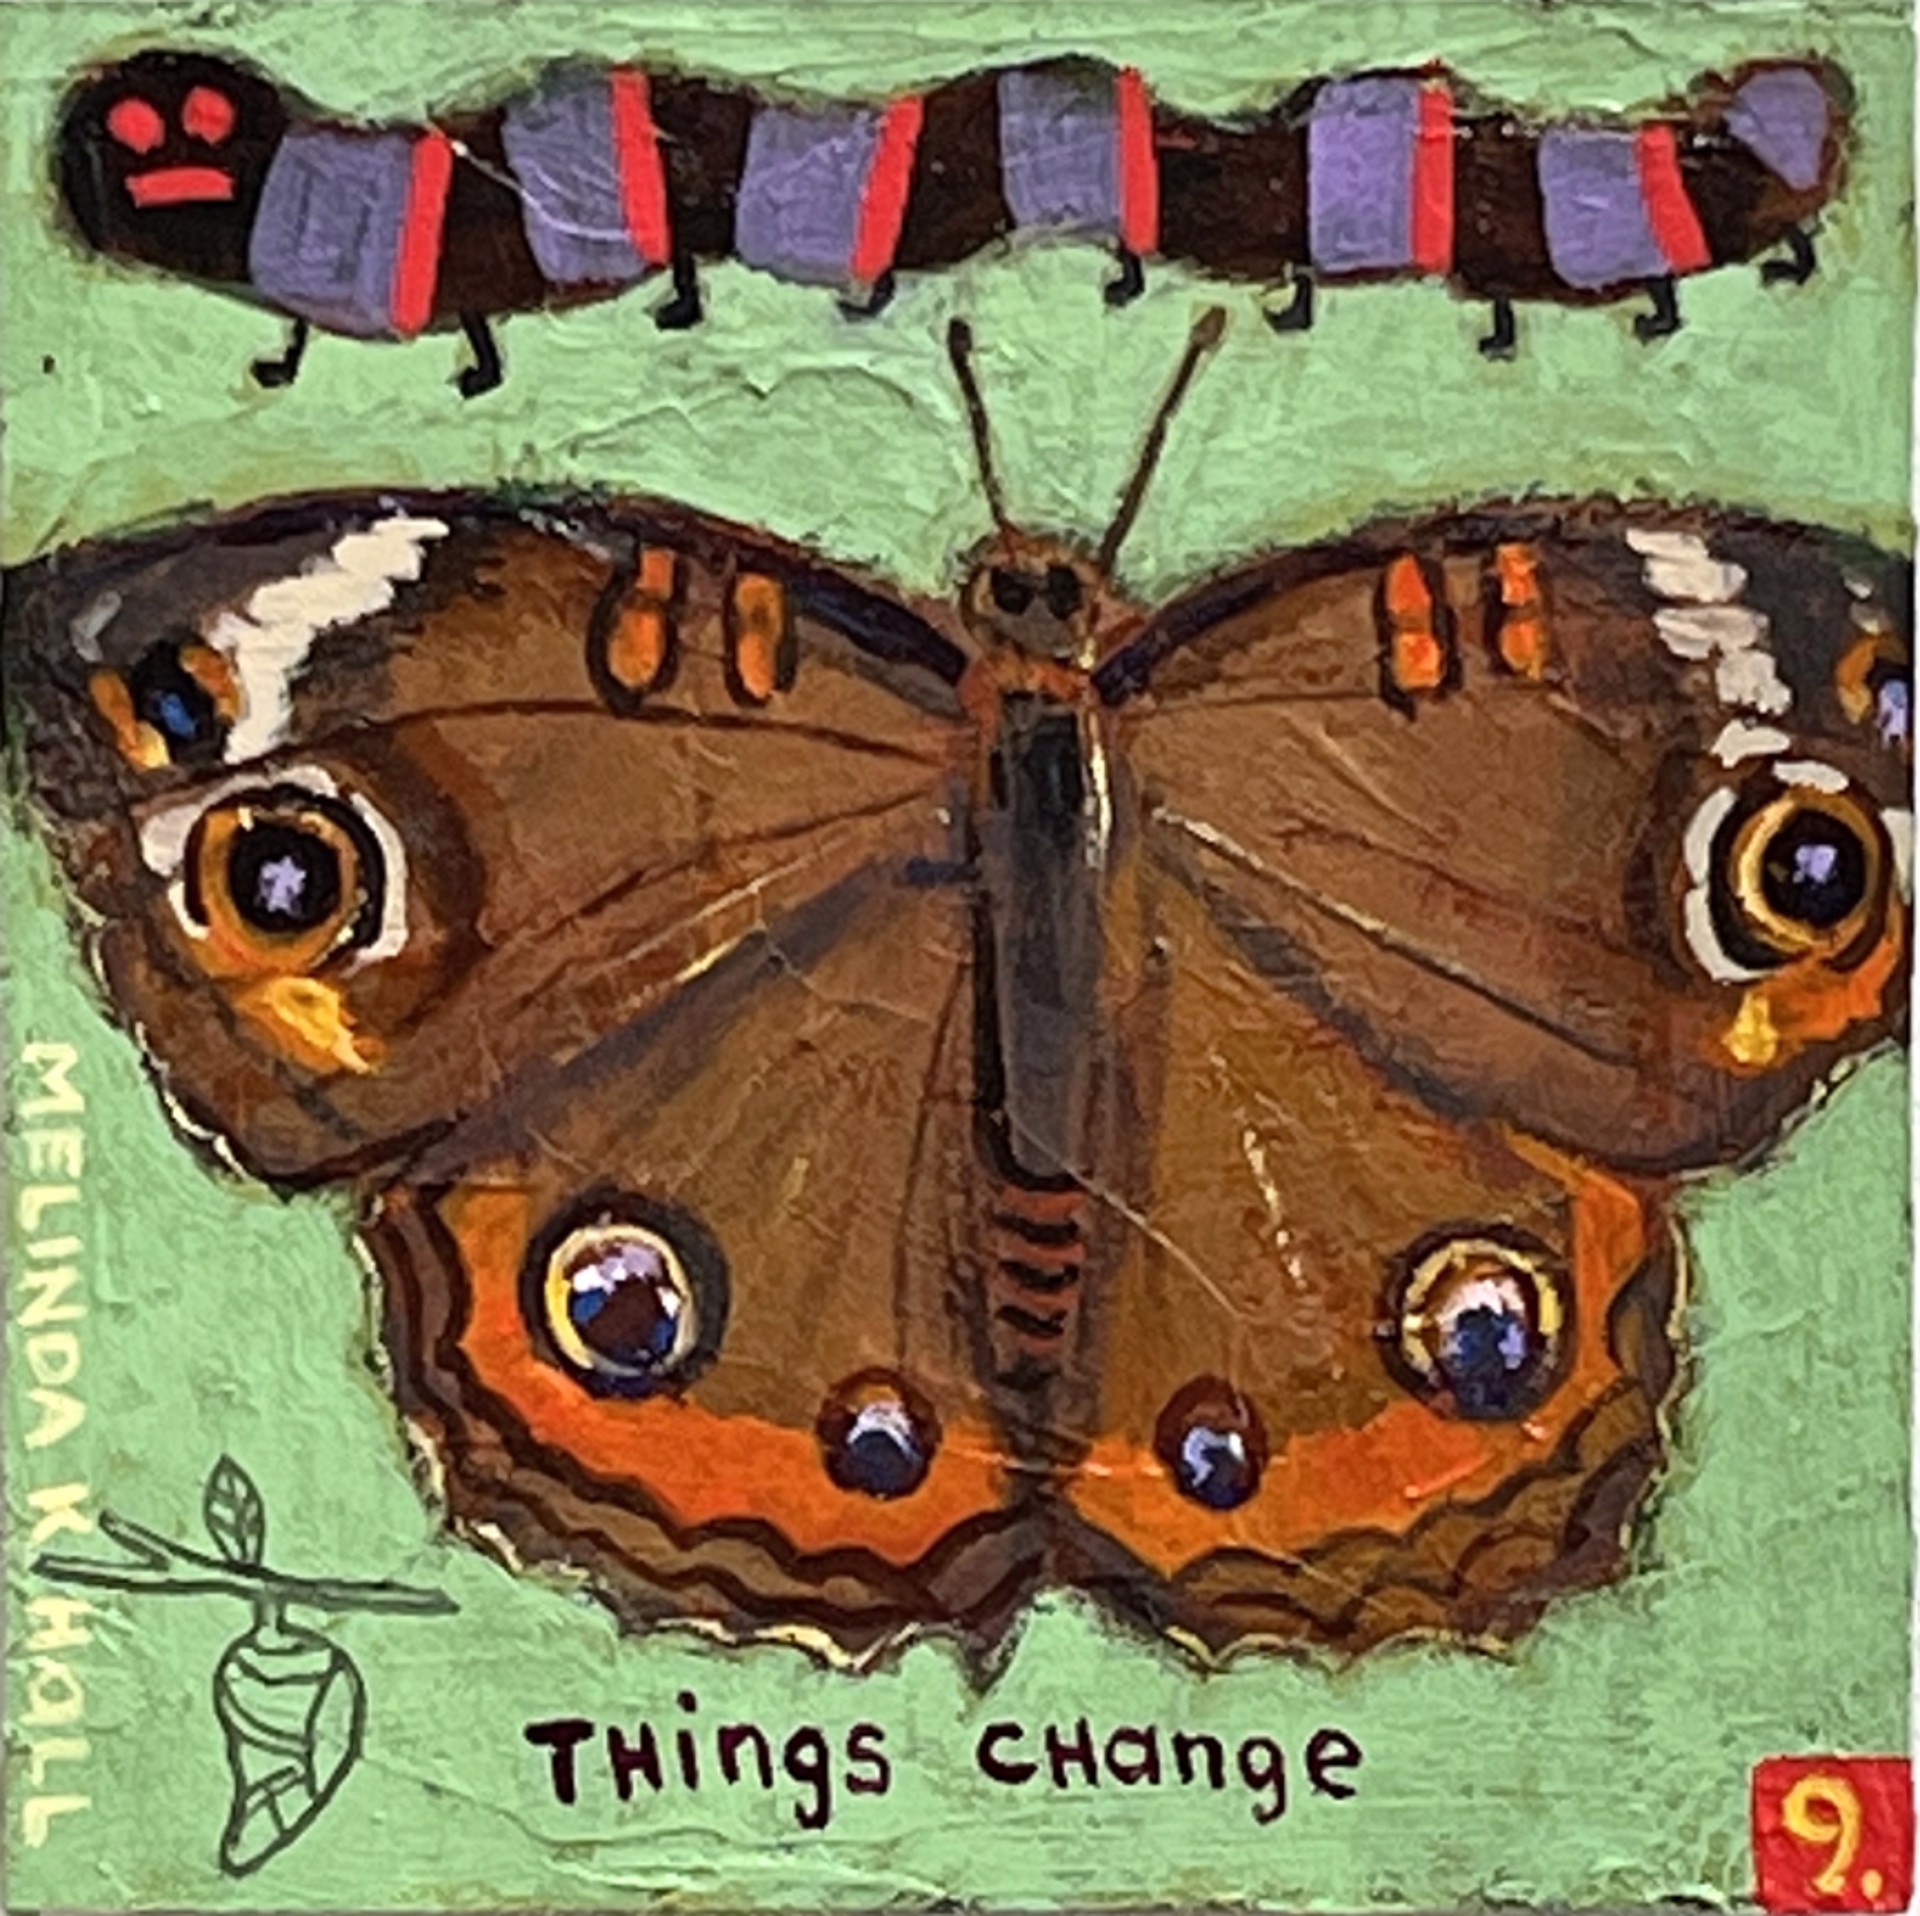 Things Change:  Butterfly #9 by Melinda K. Hall